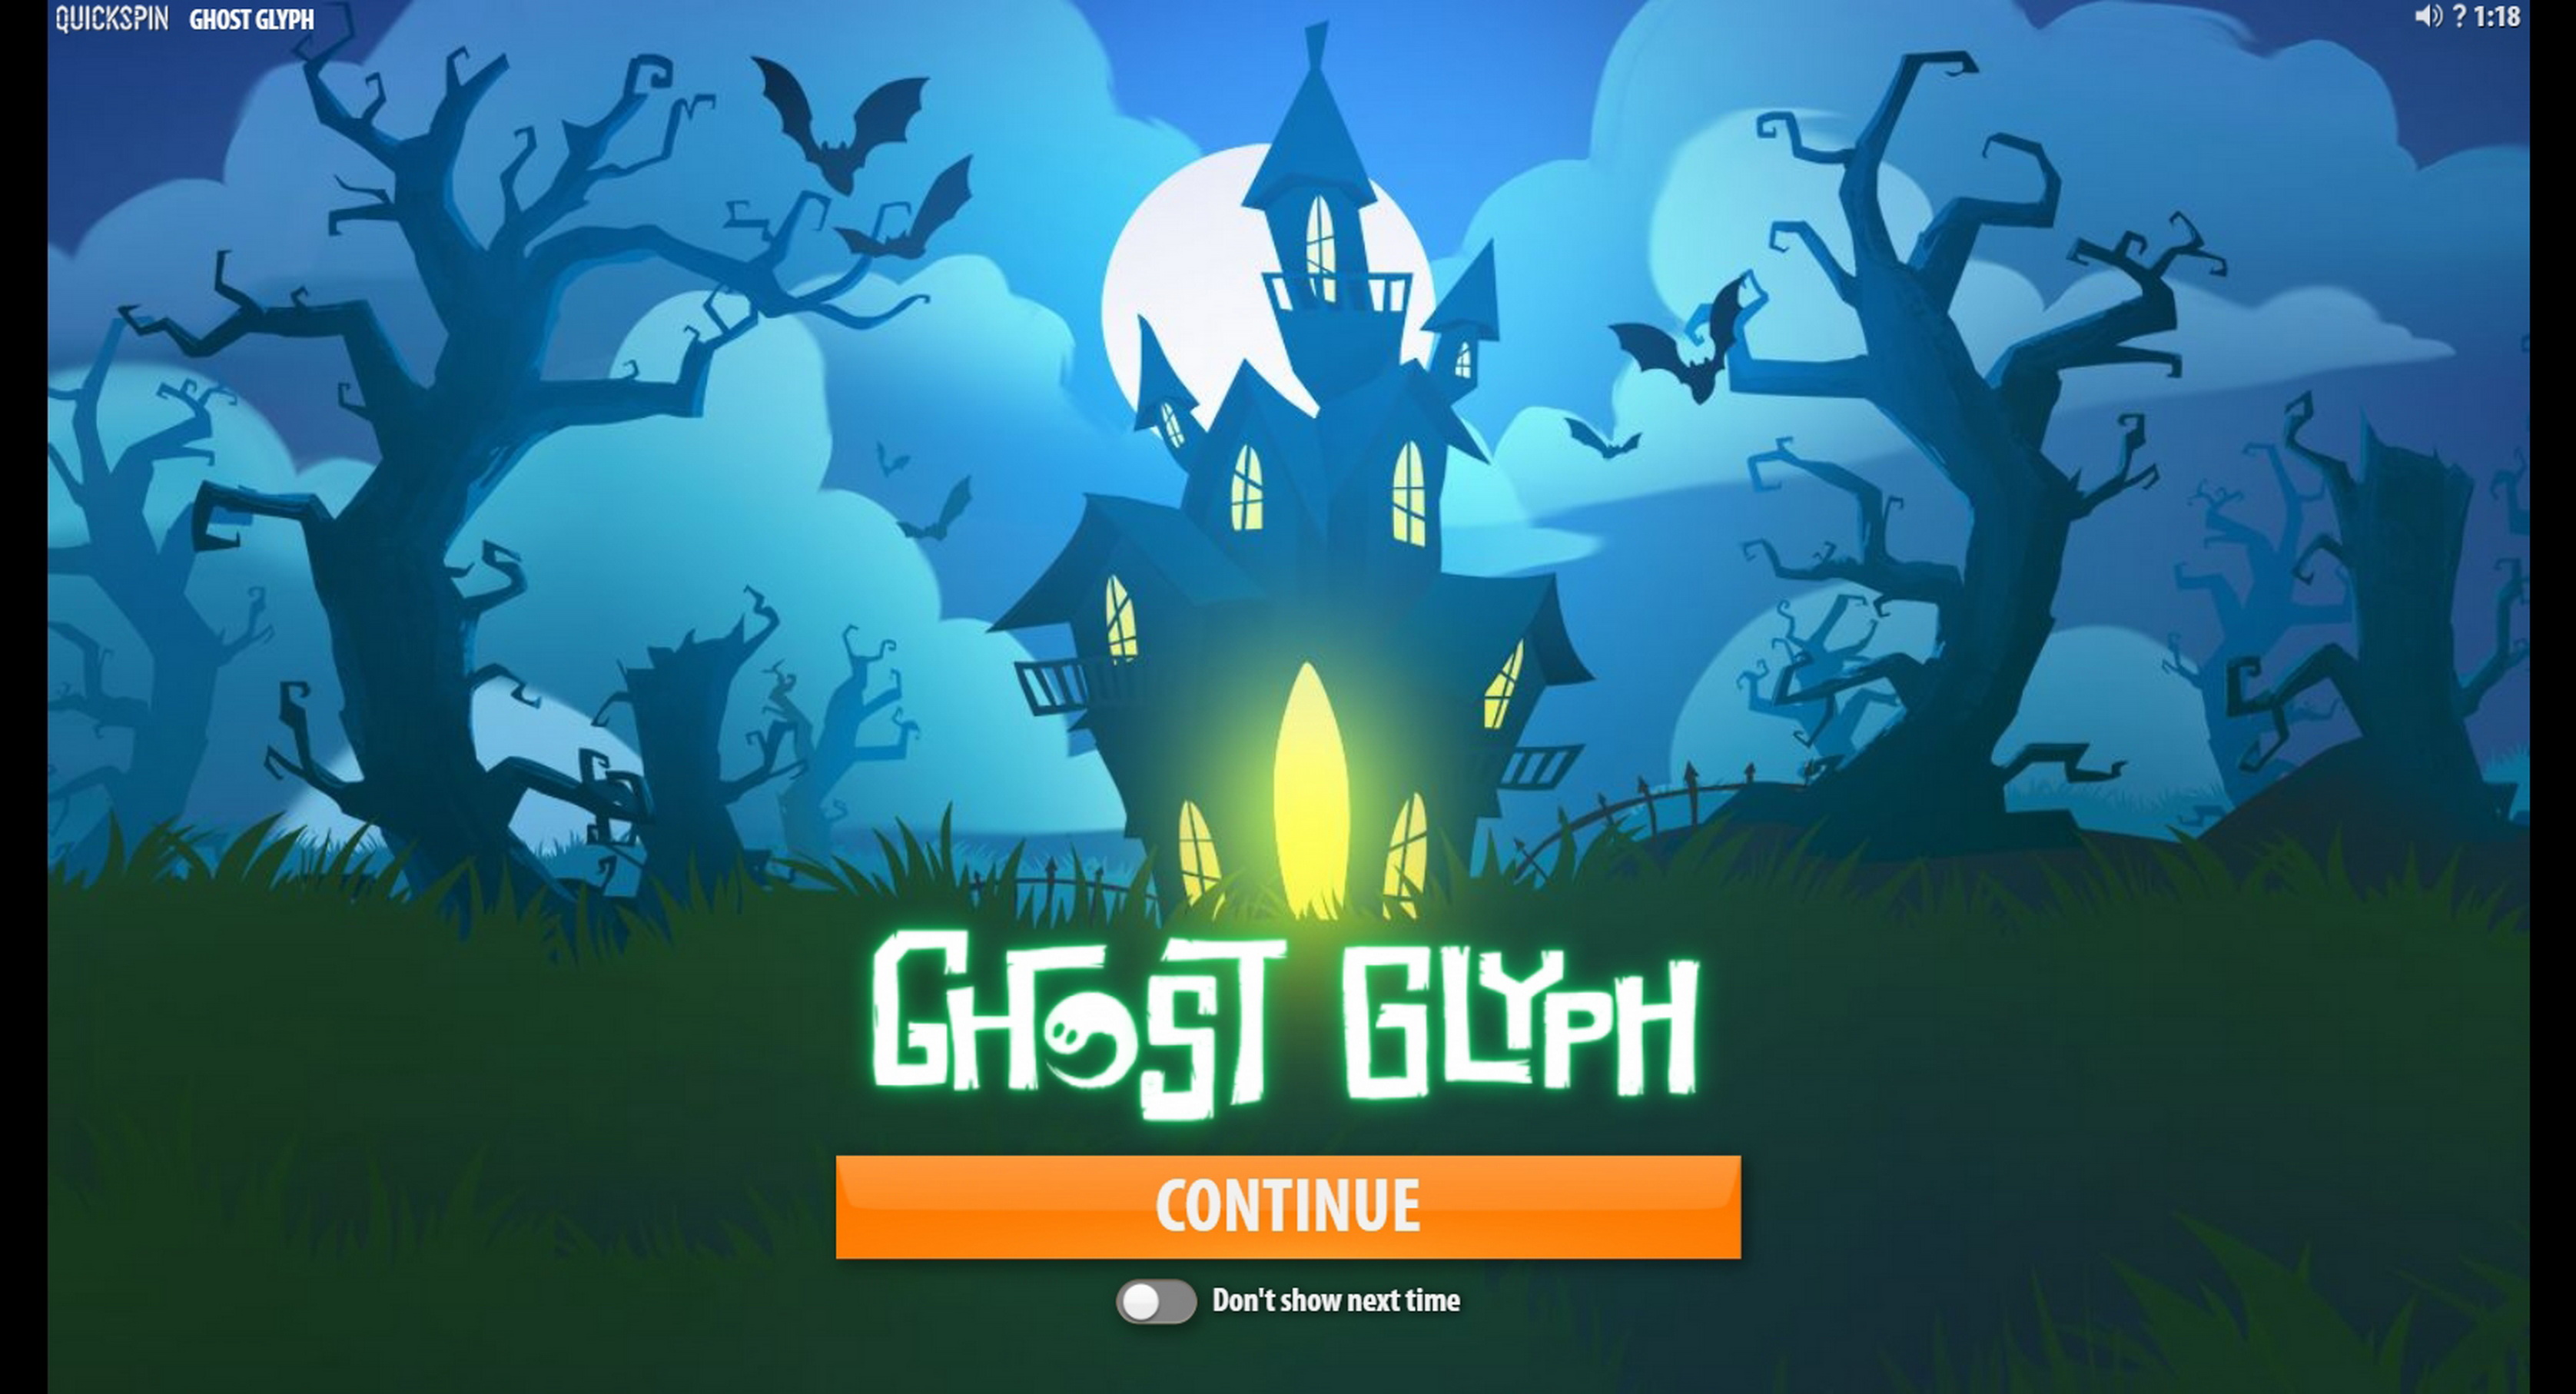 Play Ghost Glyph Free Casino Slot Game by Quickspin